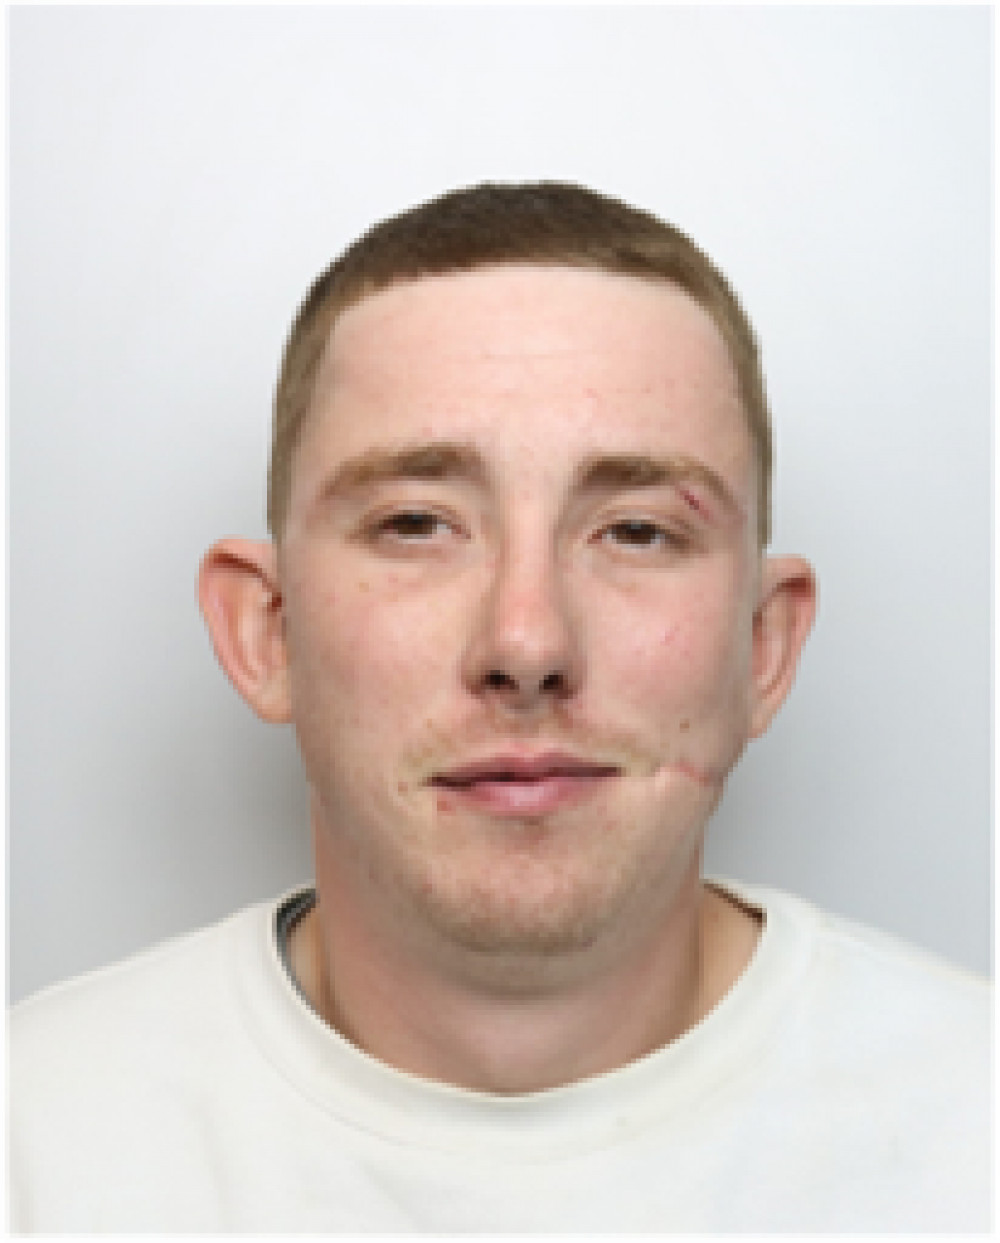 Cameron Smith is wanted in connection with an assault in Congleton. (Photo: Cheshire Police)